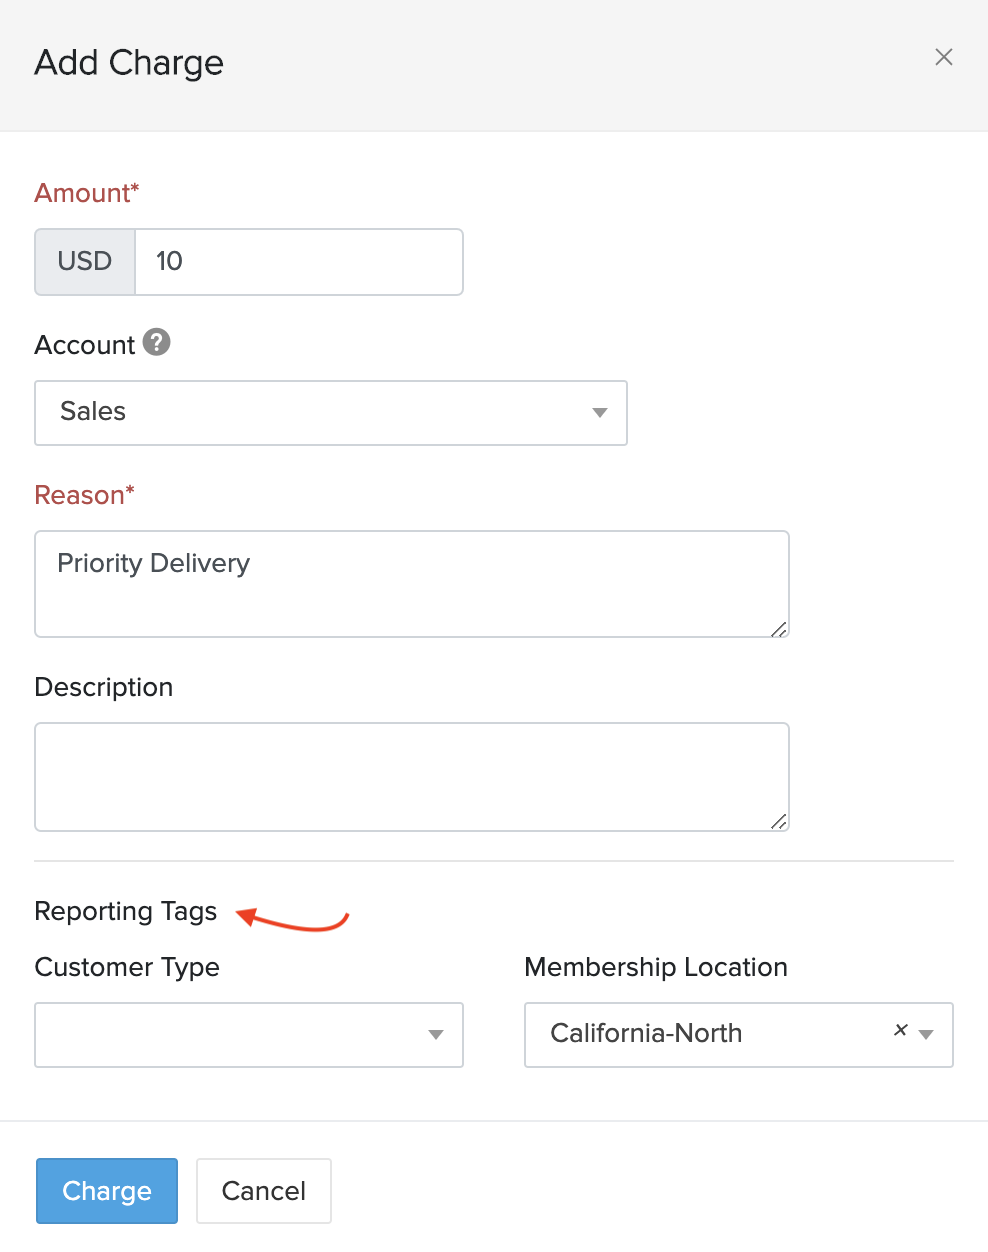 Associate Reporting Tags